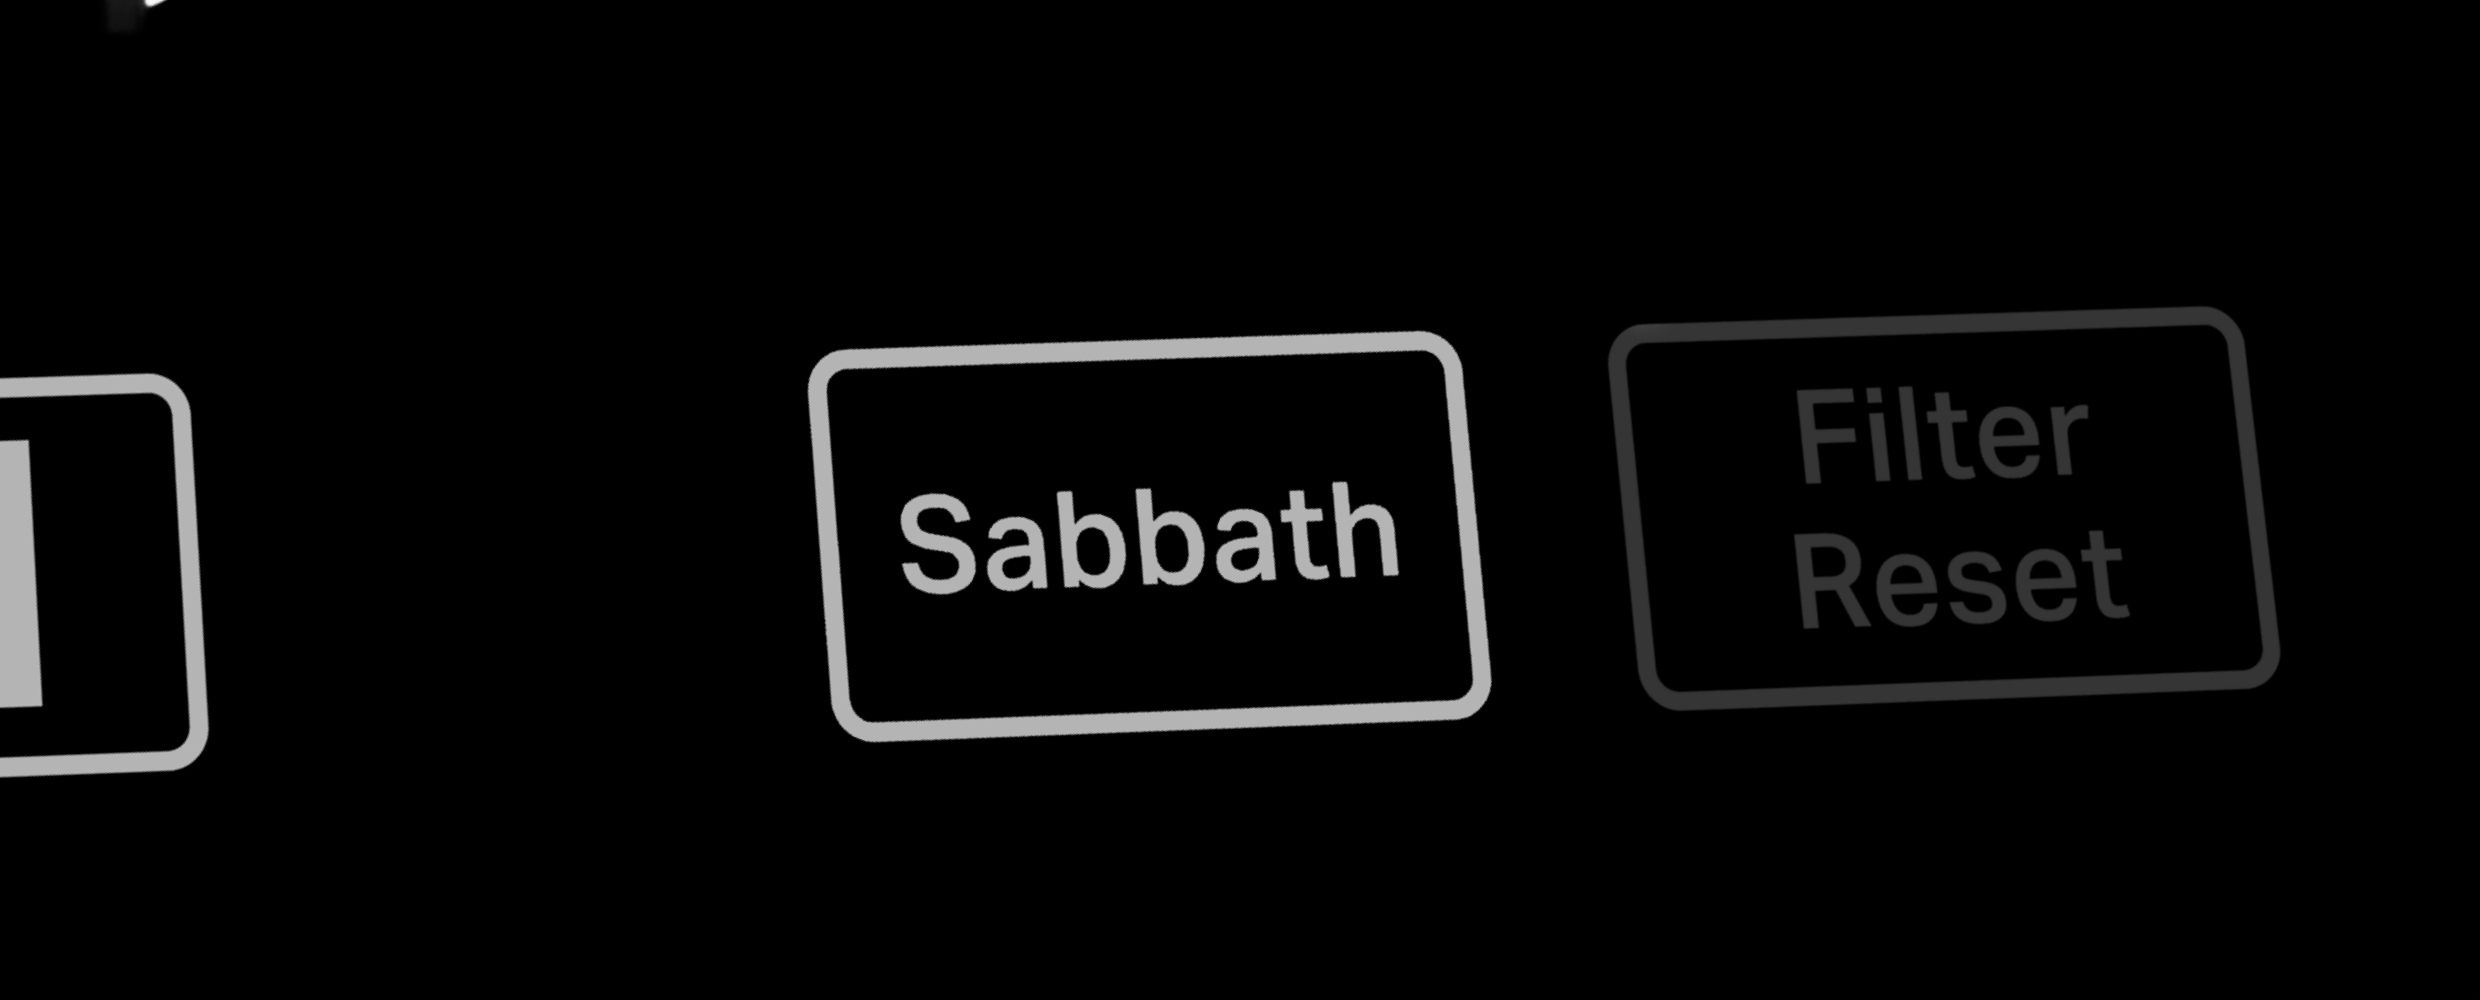 Sabbath button on Internal Touchscreen Controls on 42" KitchenAid® Built-In Side-by-Side Refrigerator